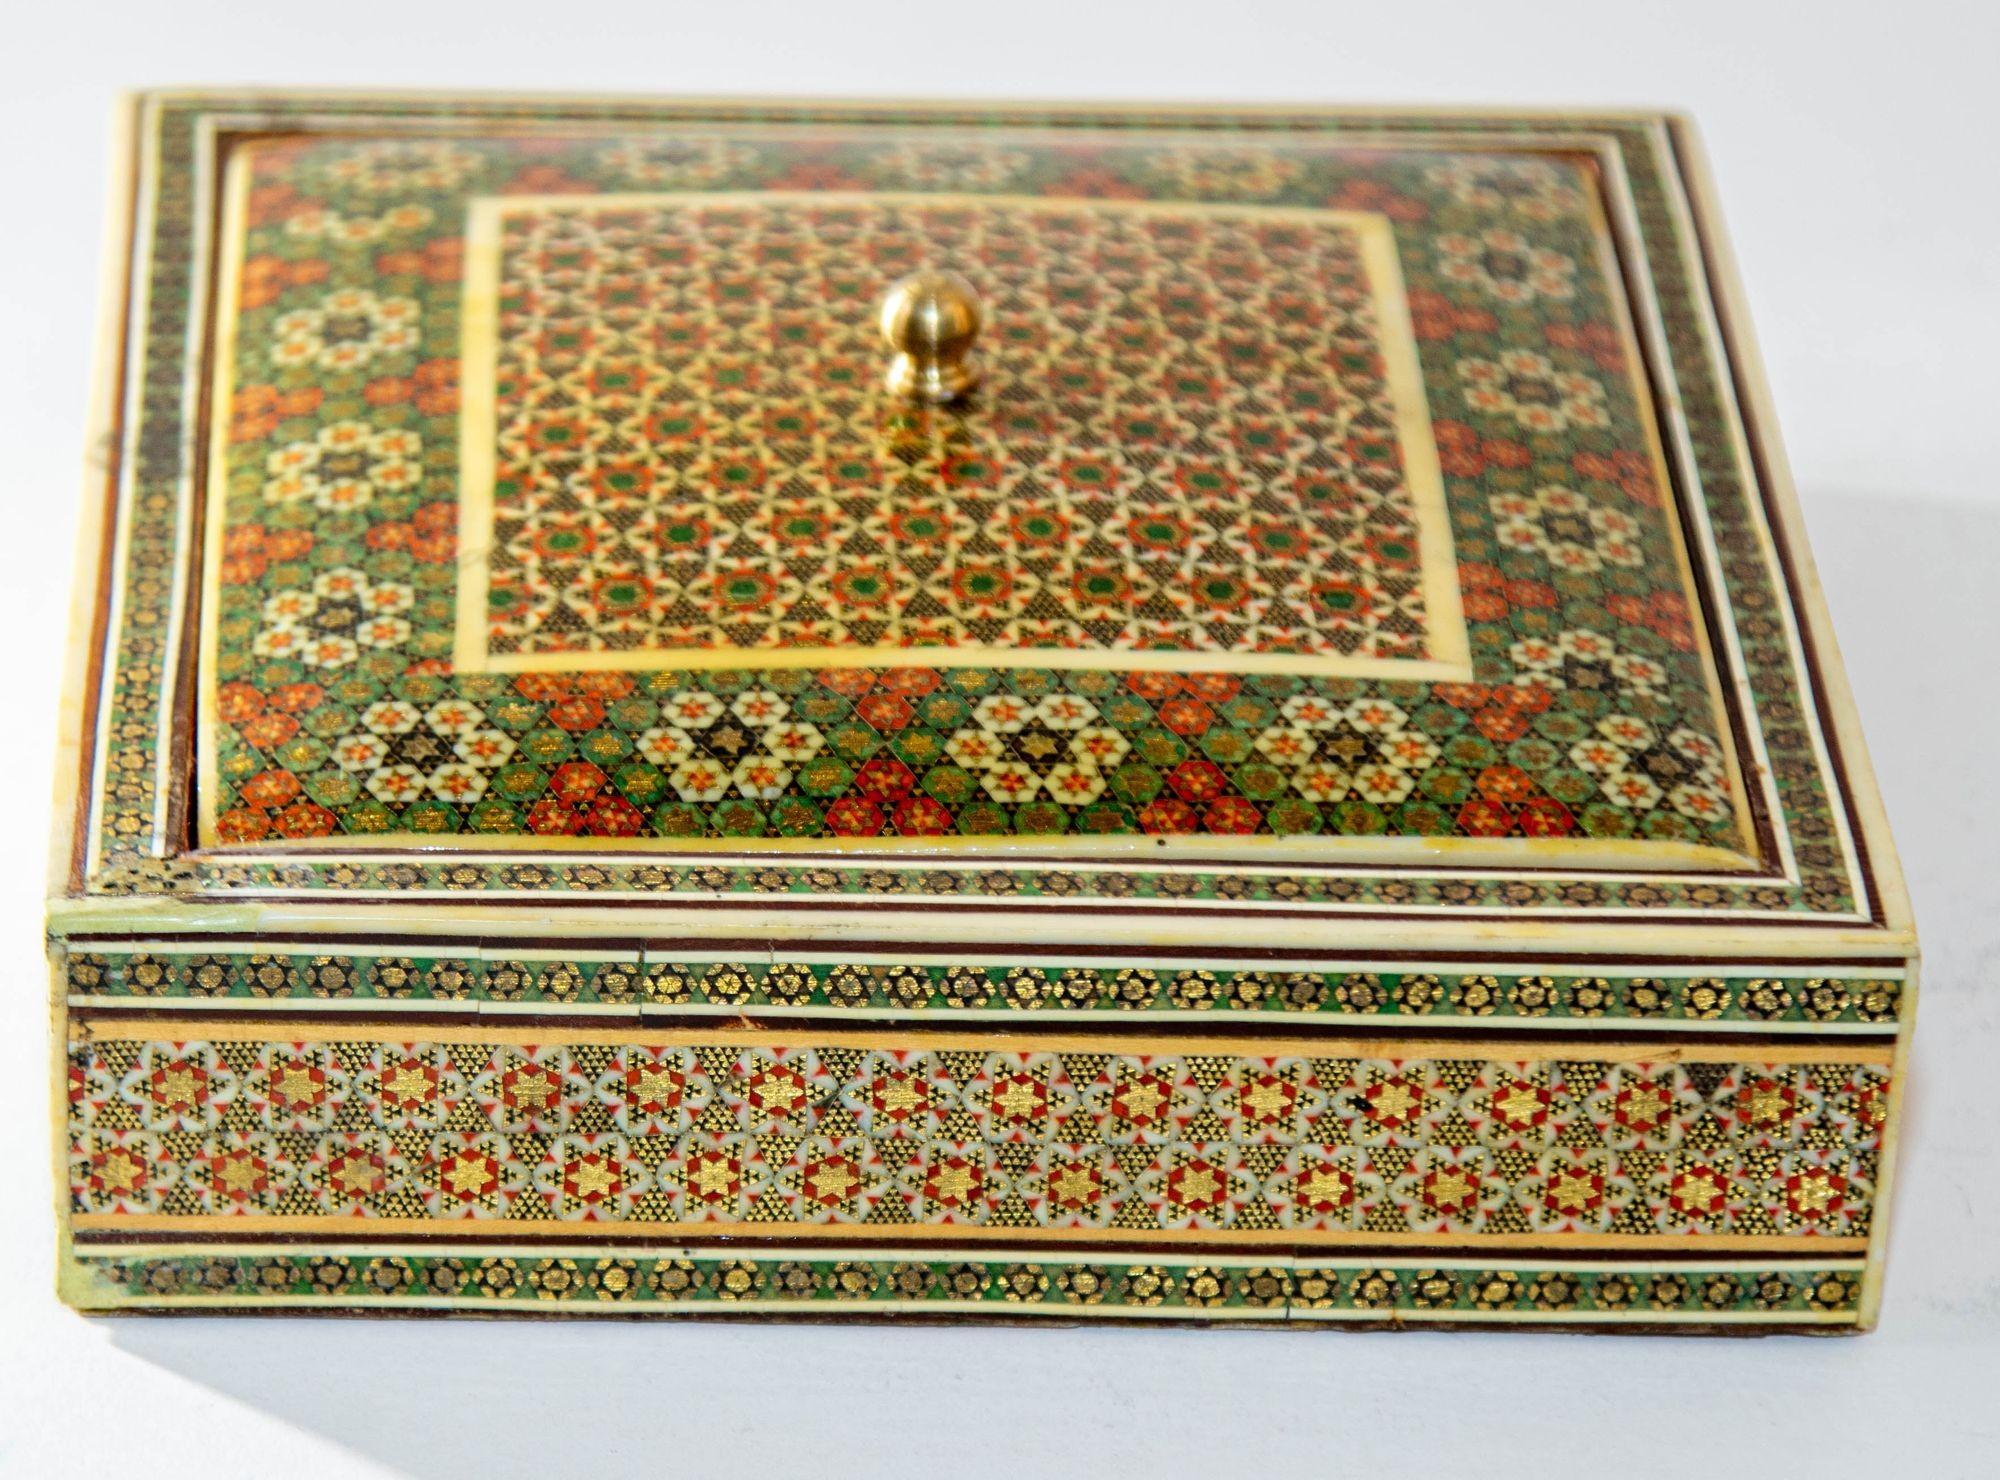 20th Century 1950s Anglo Indian Micro Sadeli Mosaic Inlaid Jewelry Box For Sale